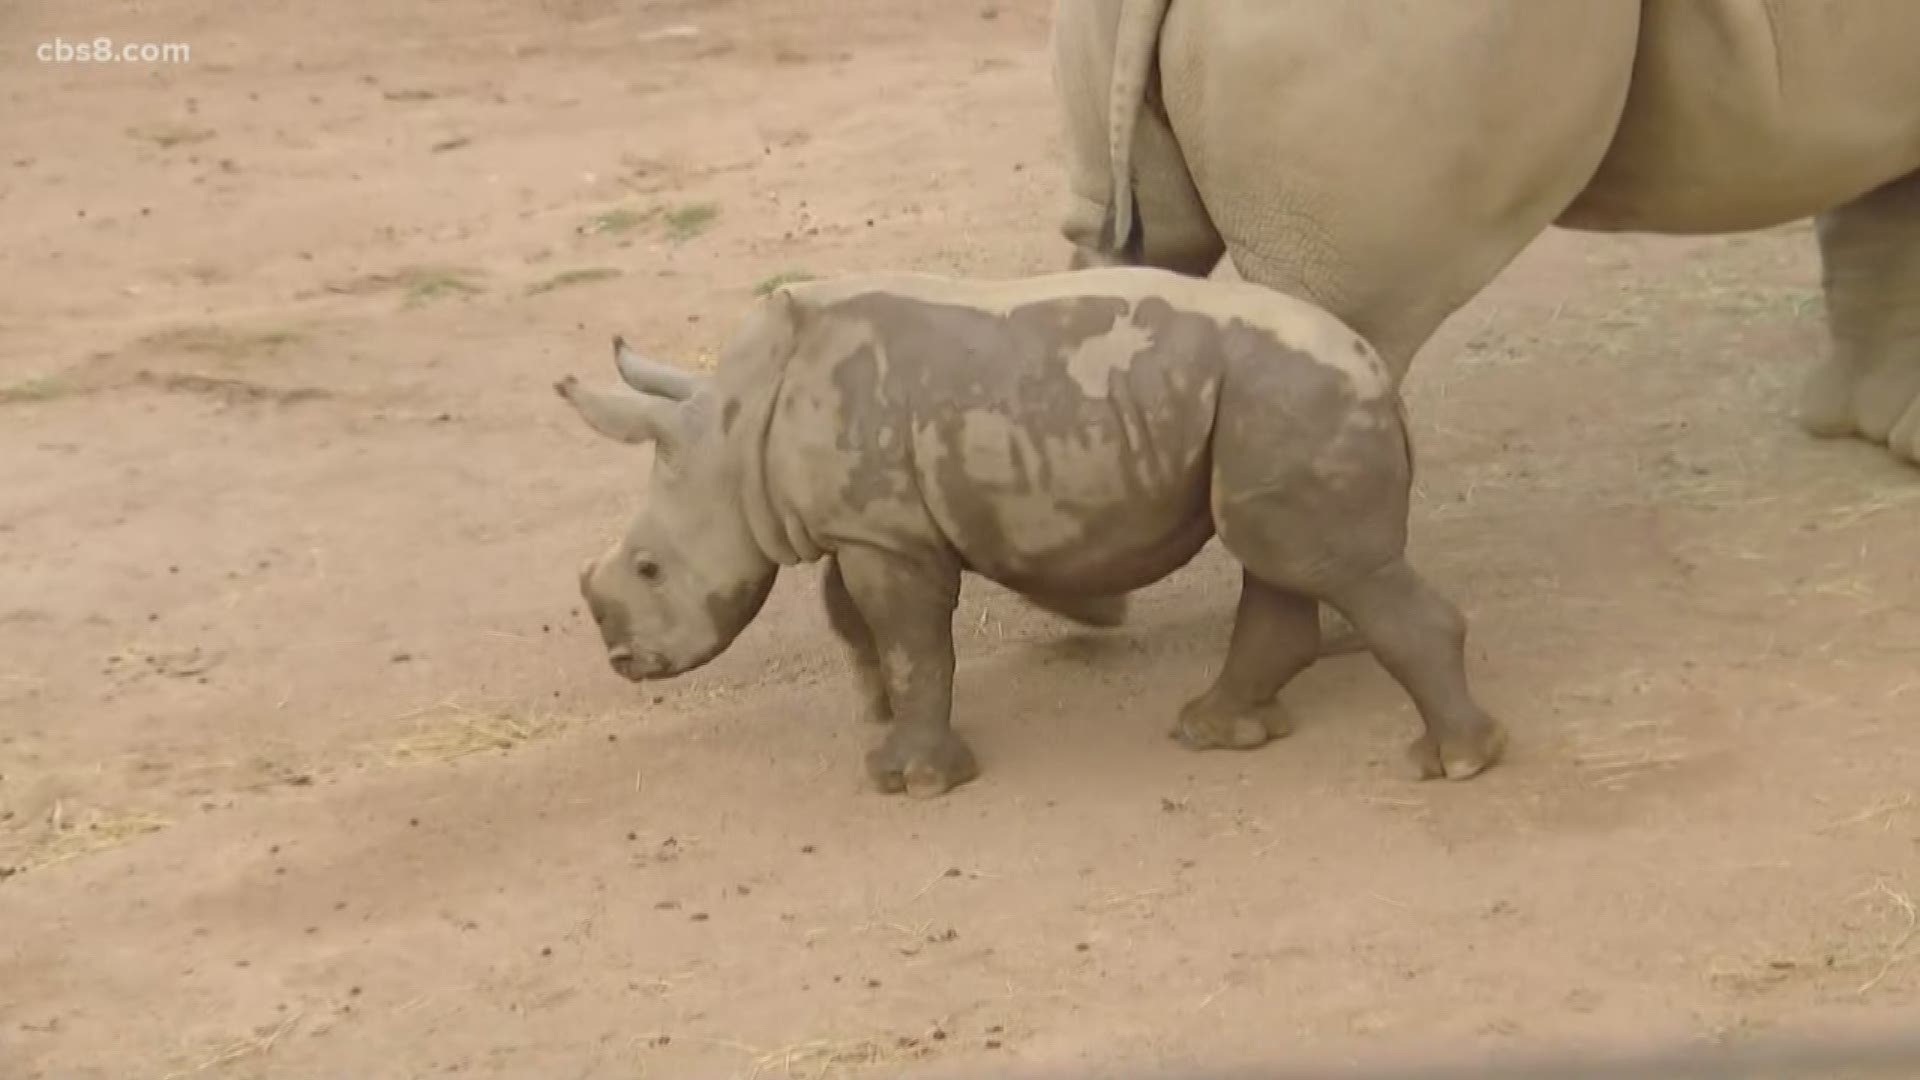 A group of rhinos is called a crash